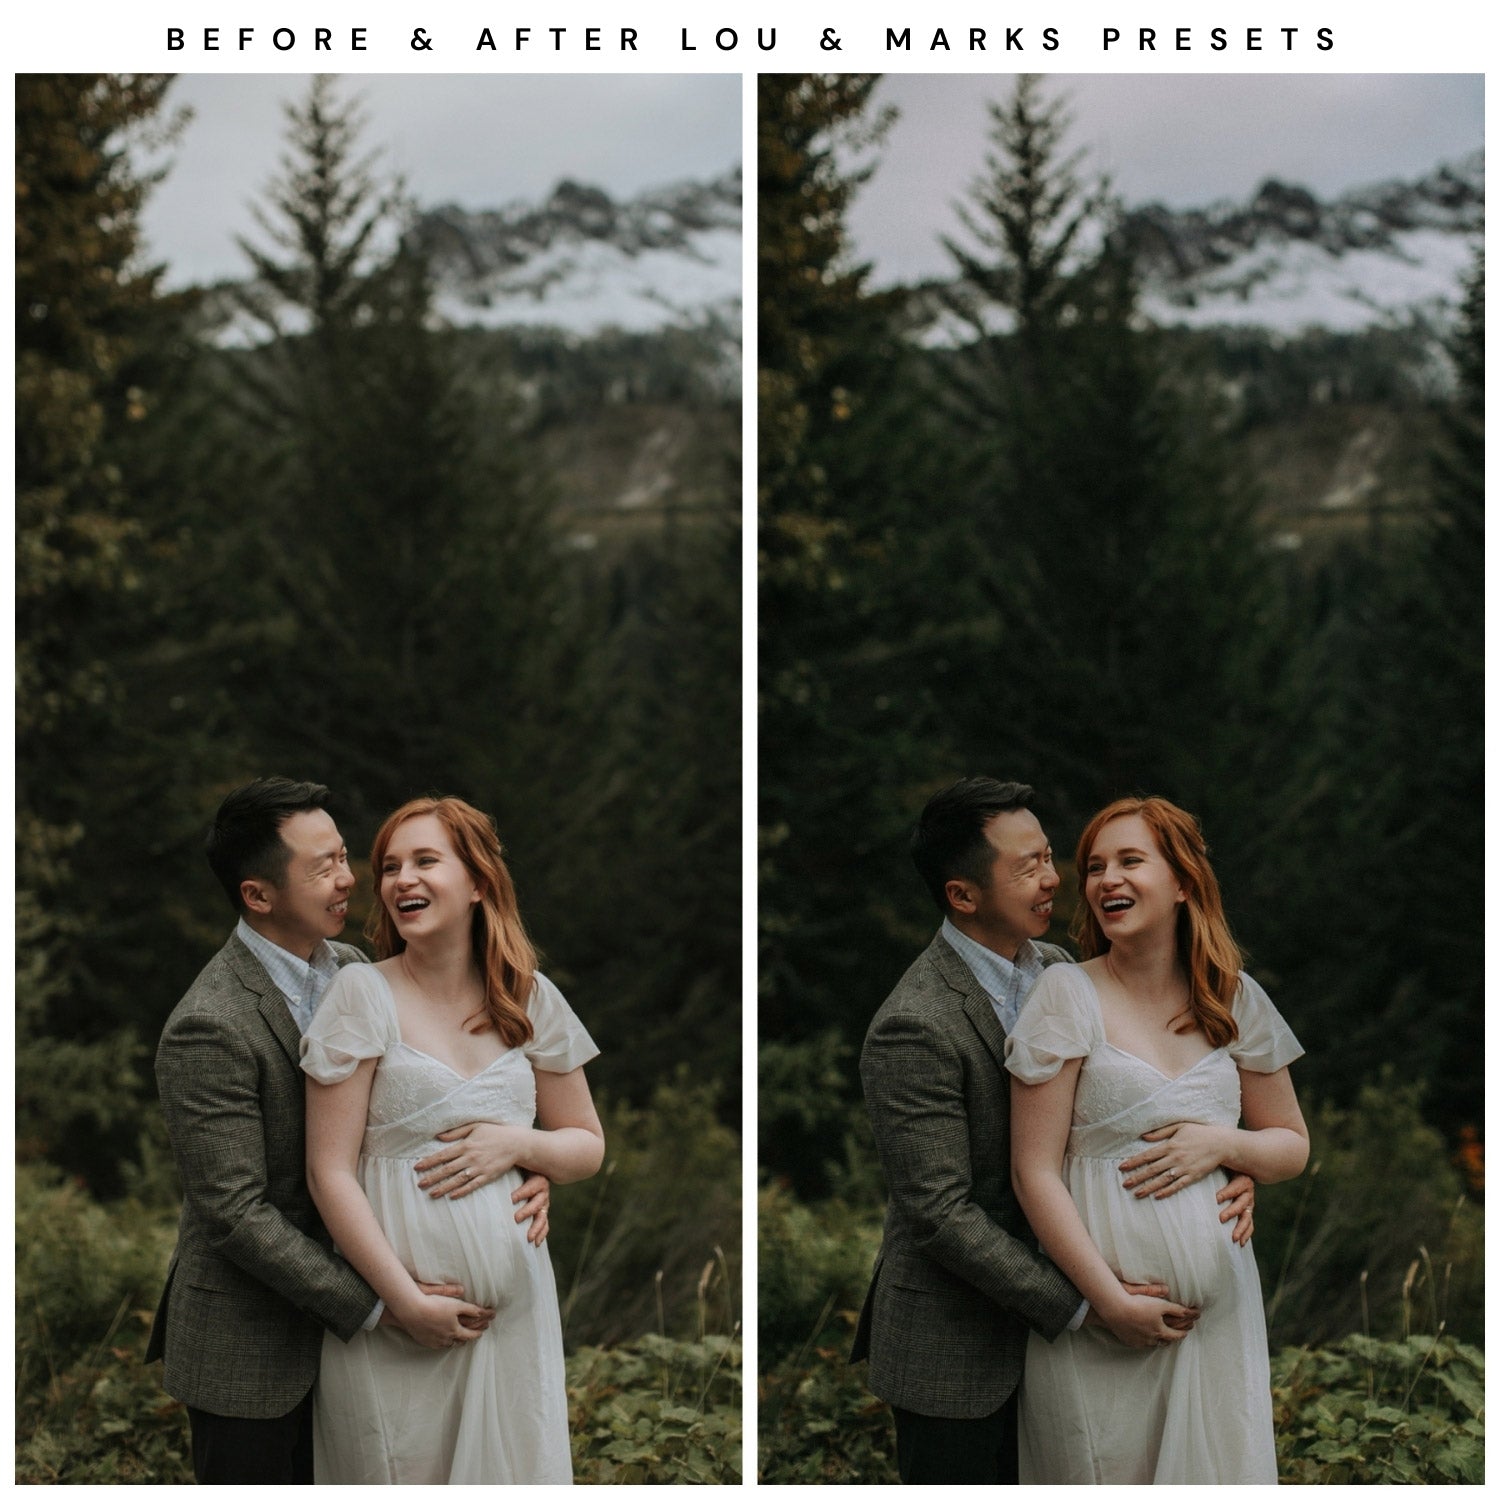 Lou And Marks Presets Moody Lightroom Presets Bundle The Best Moody Presets Engagement